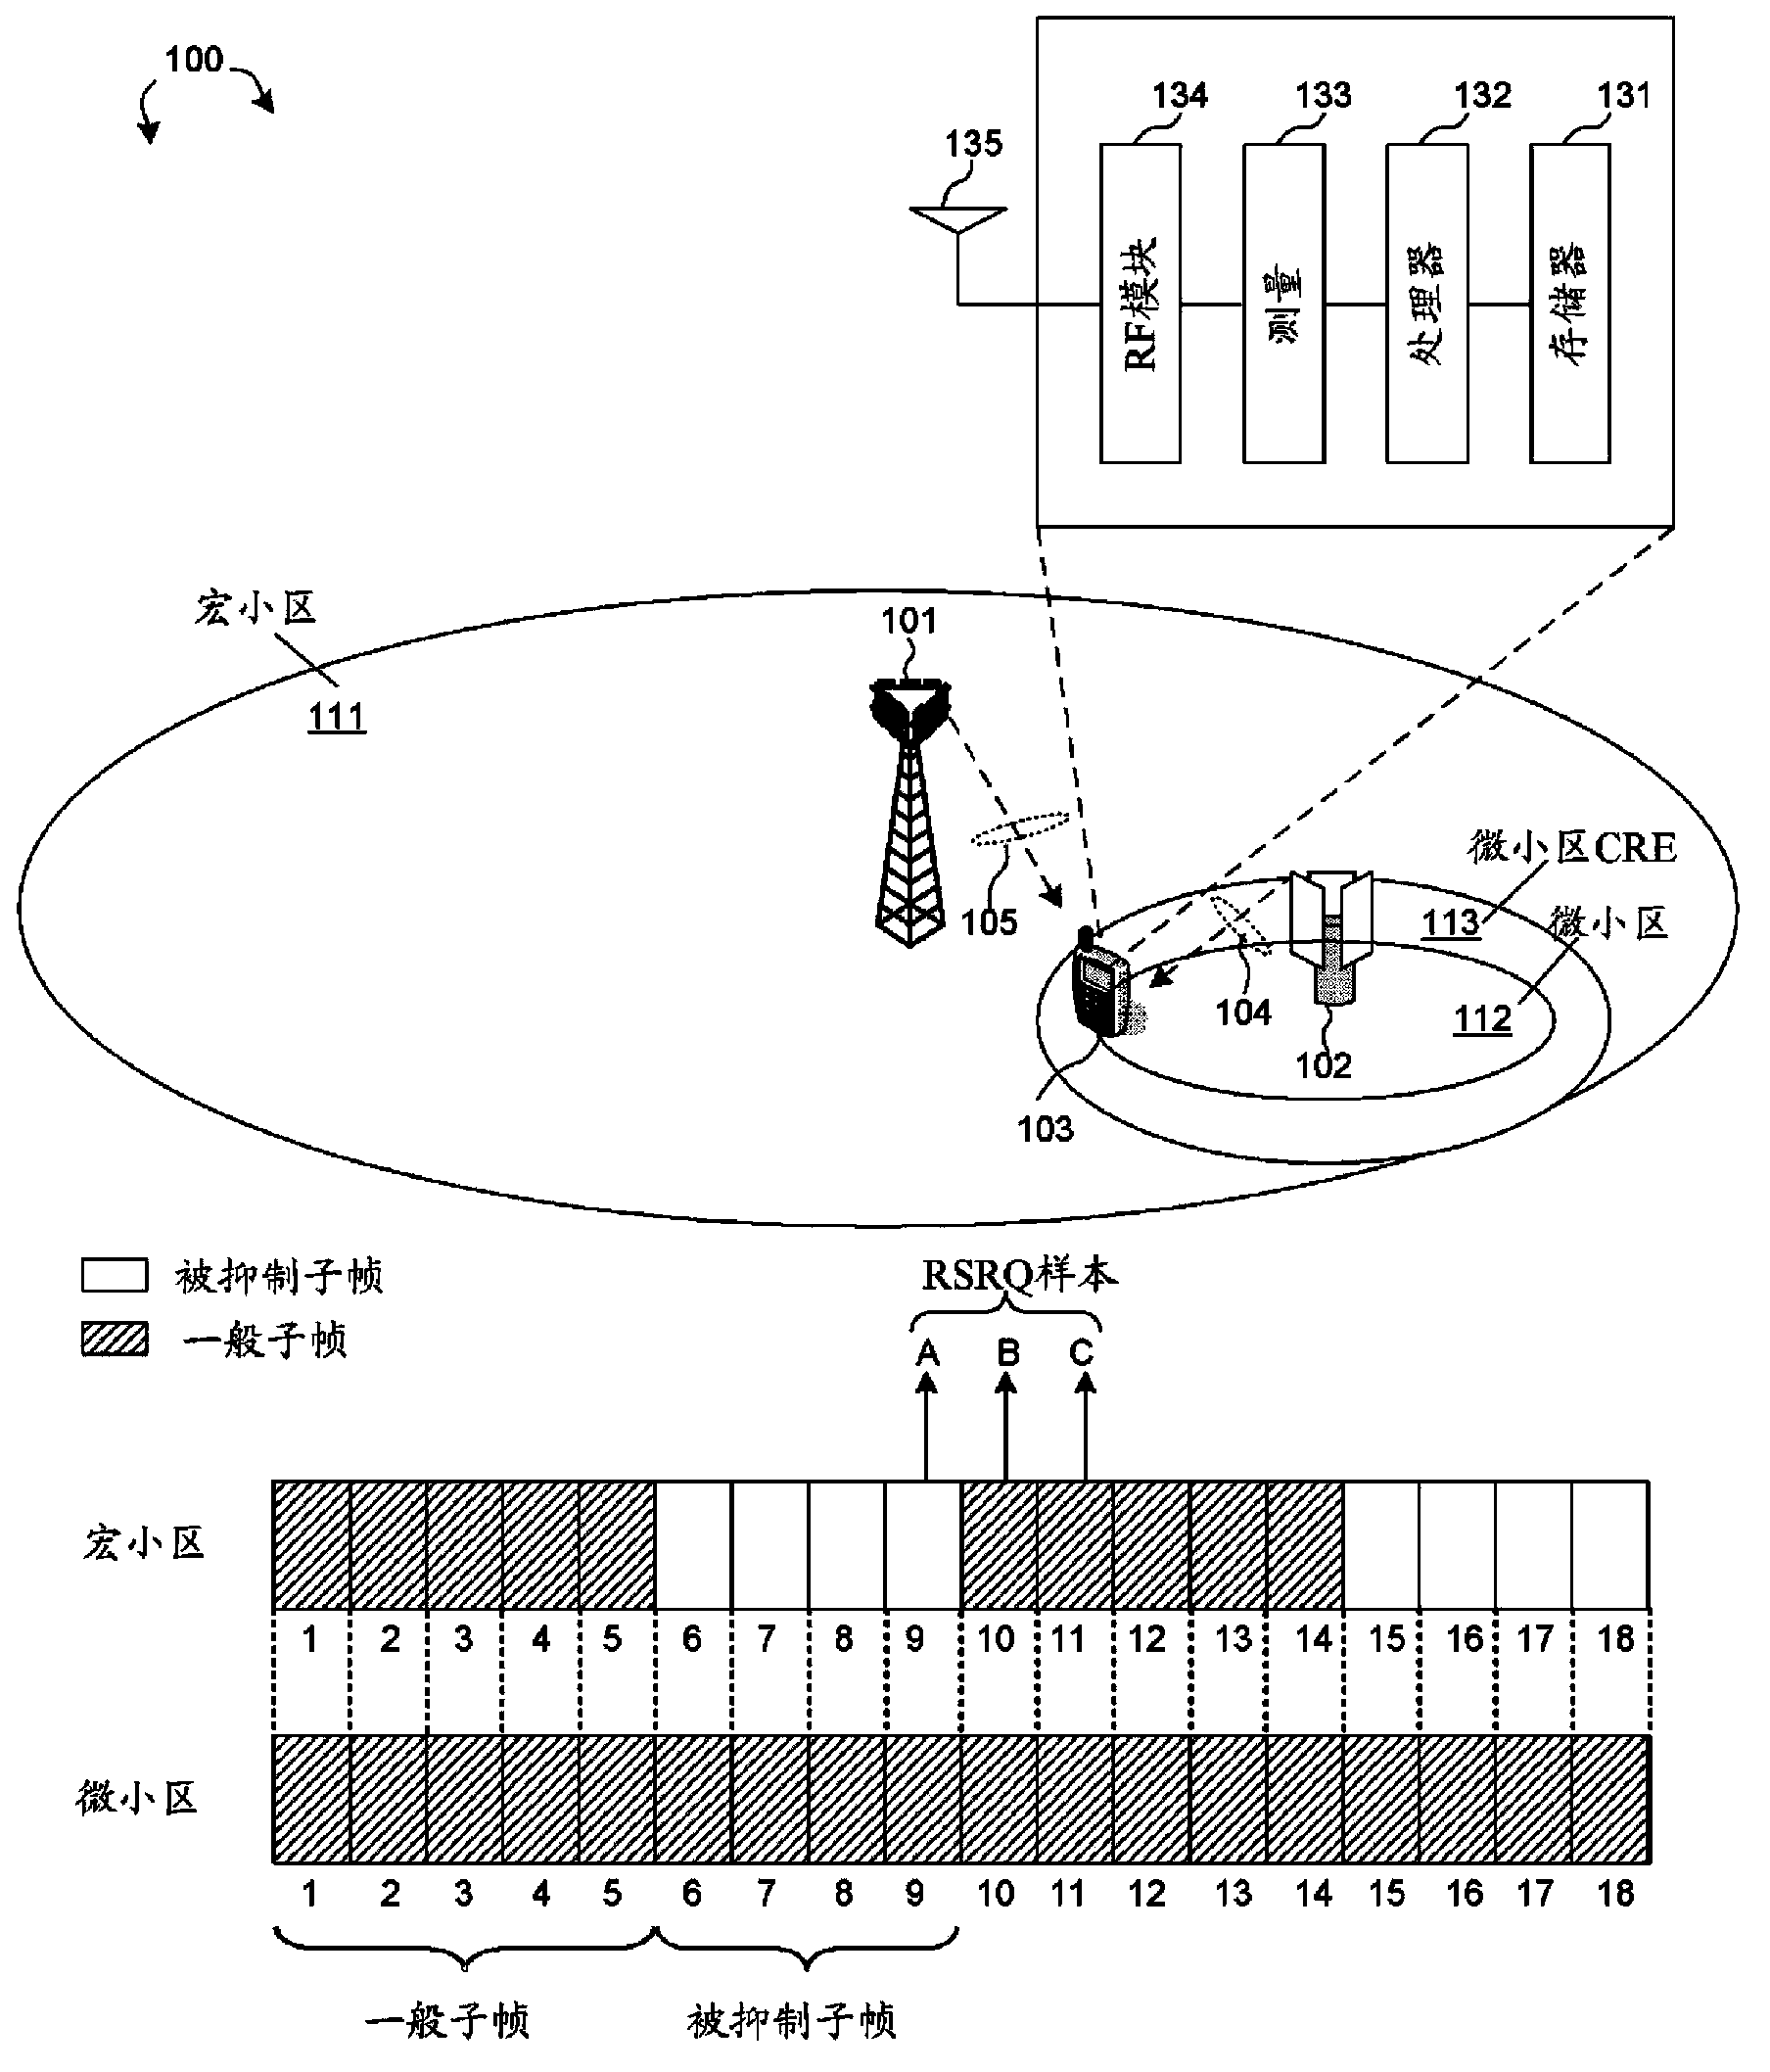 Method of UE RSRQ measurement precuation for interference coordination